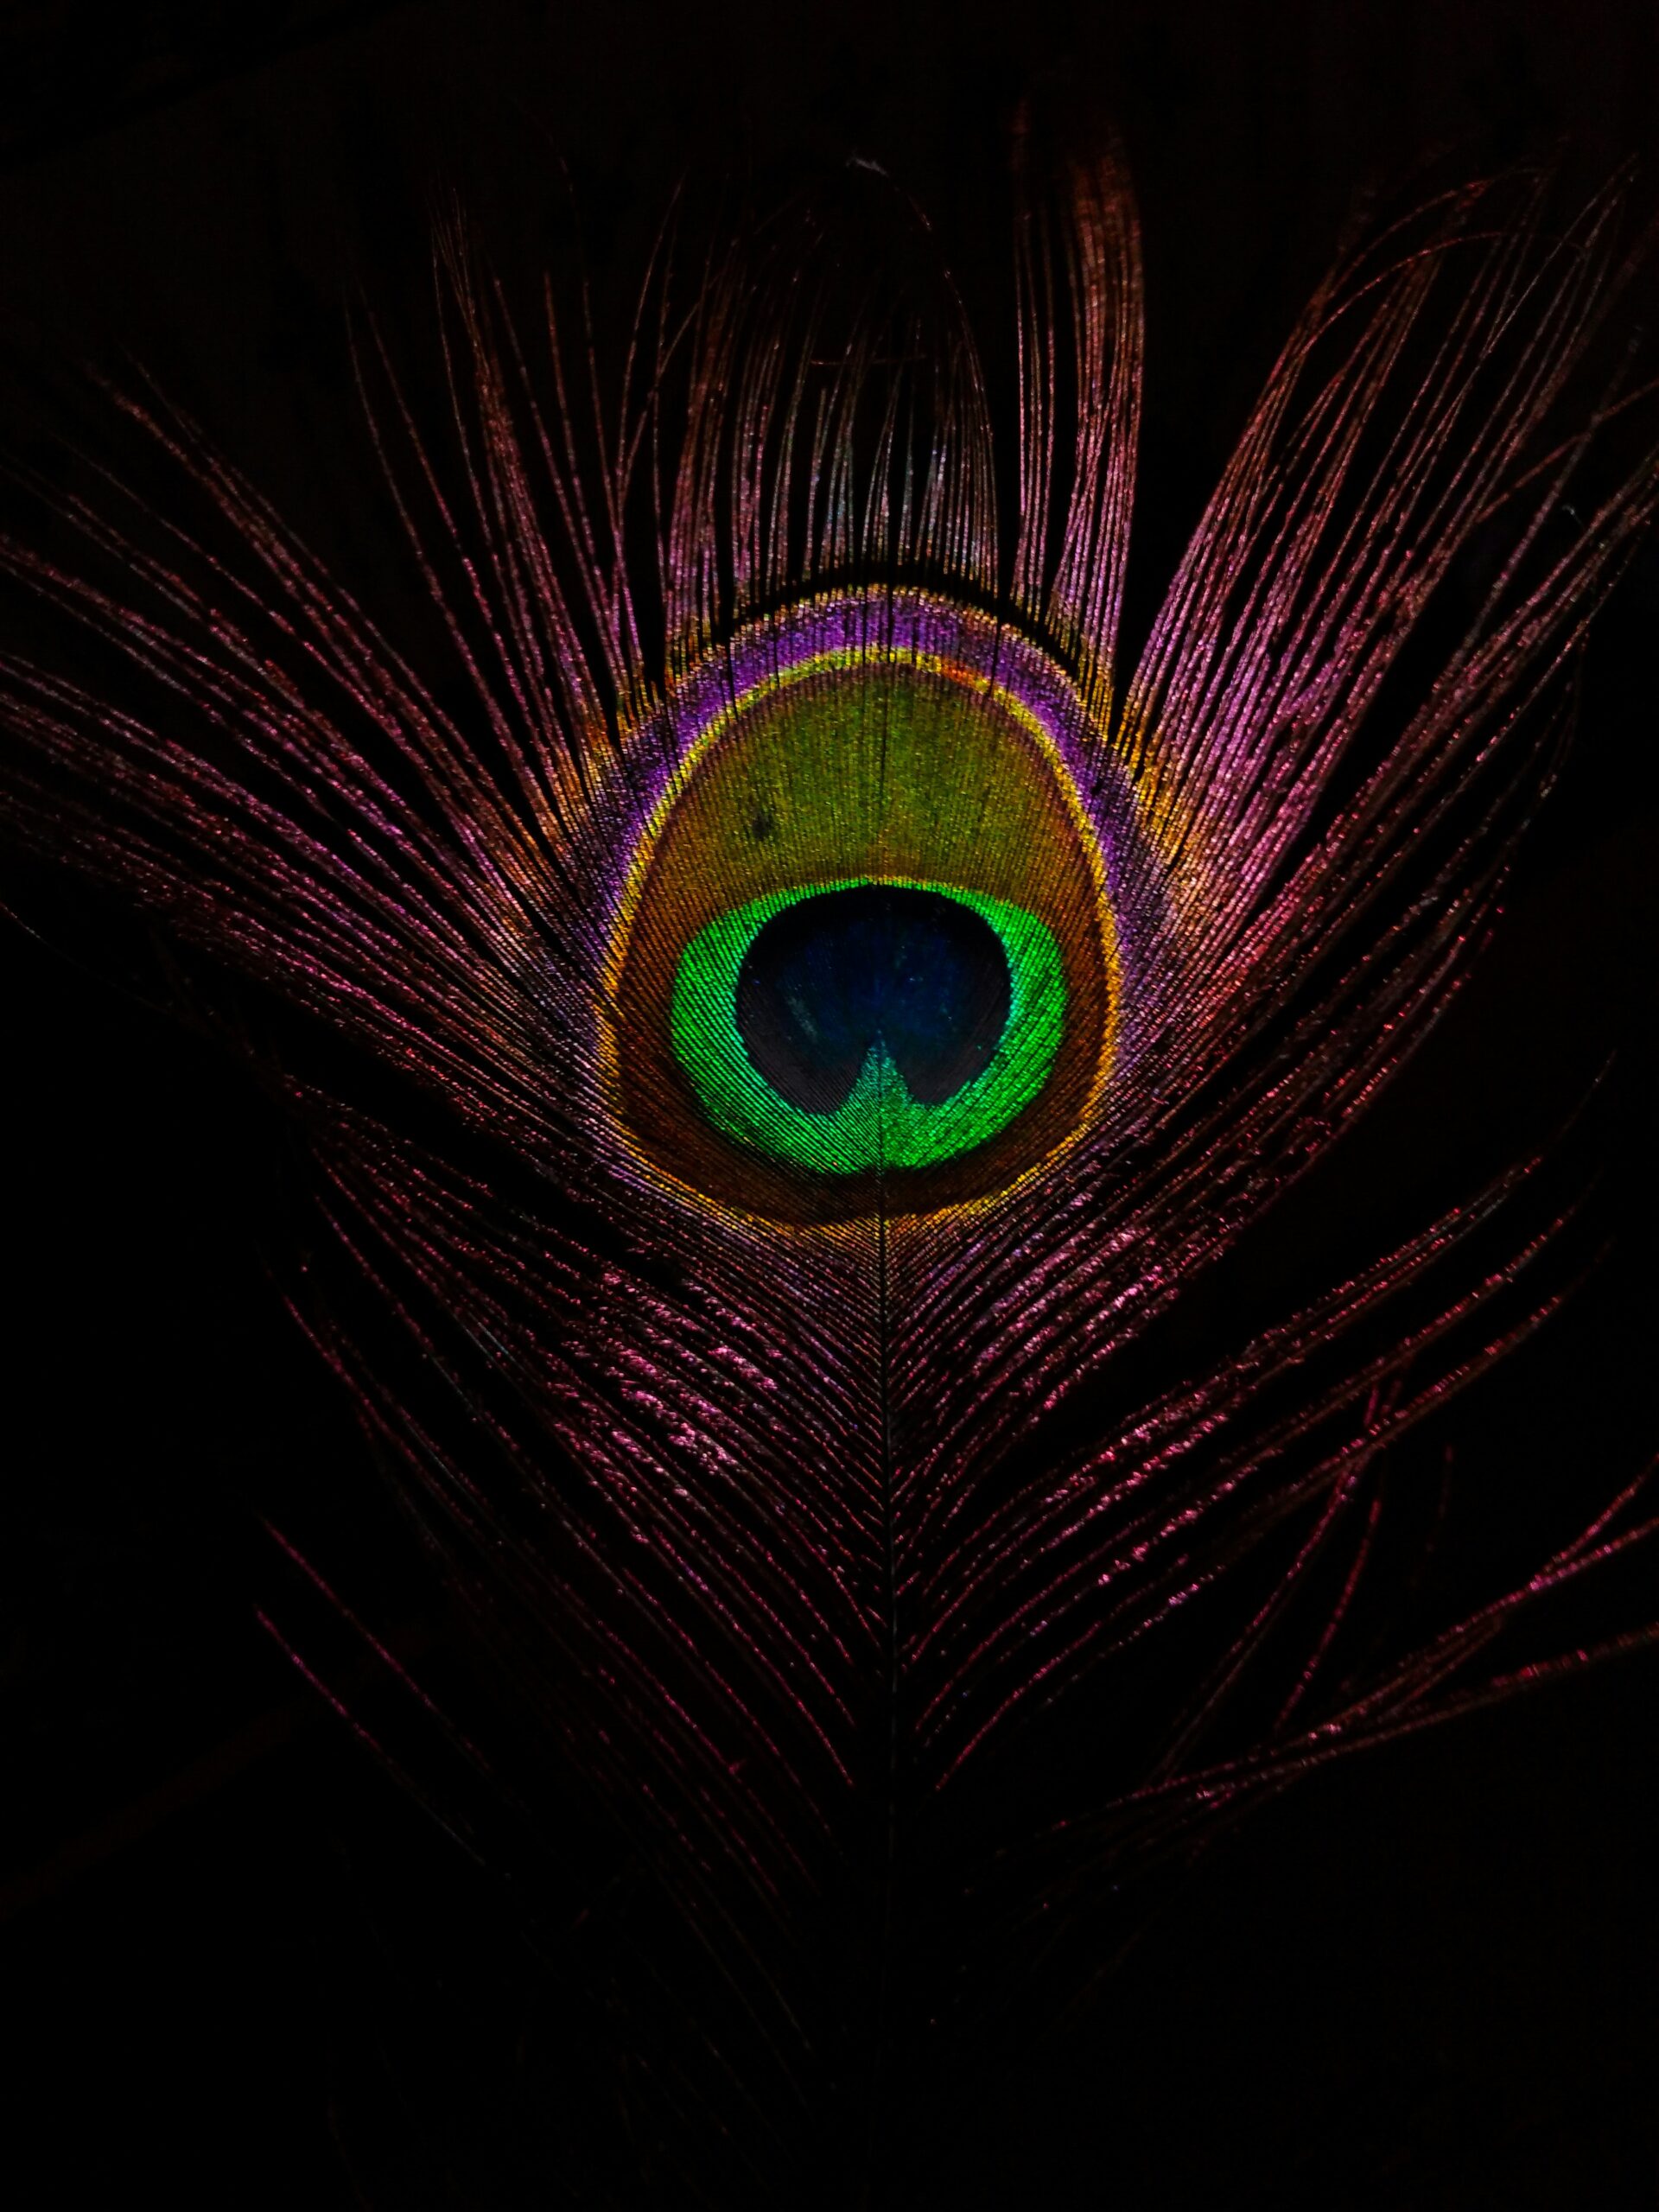 Photo of a Peacock Feather against a black background for an article by S Rupsha Mitra for Houghton & Mackay Magazine